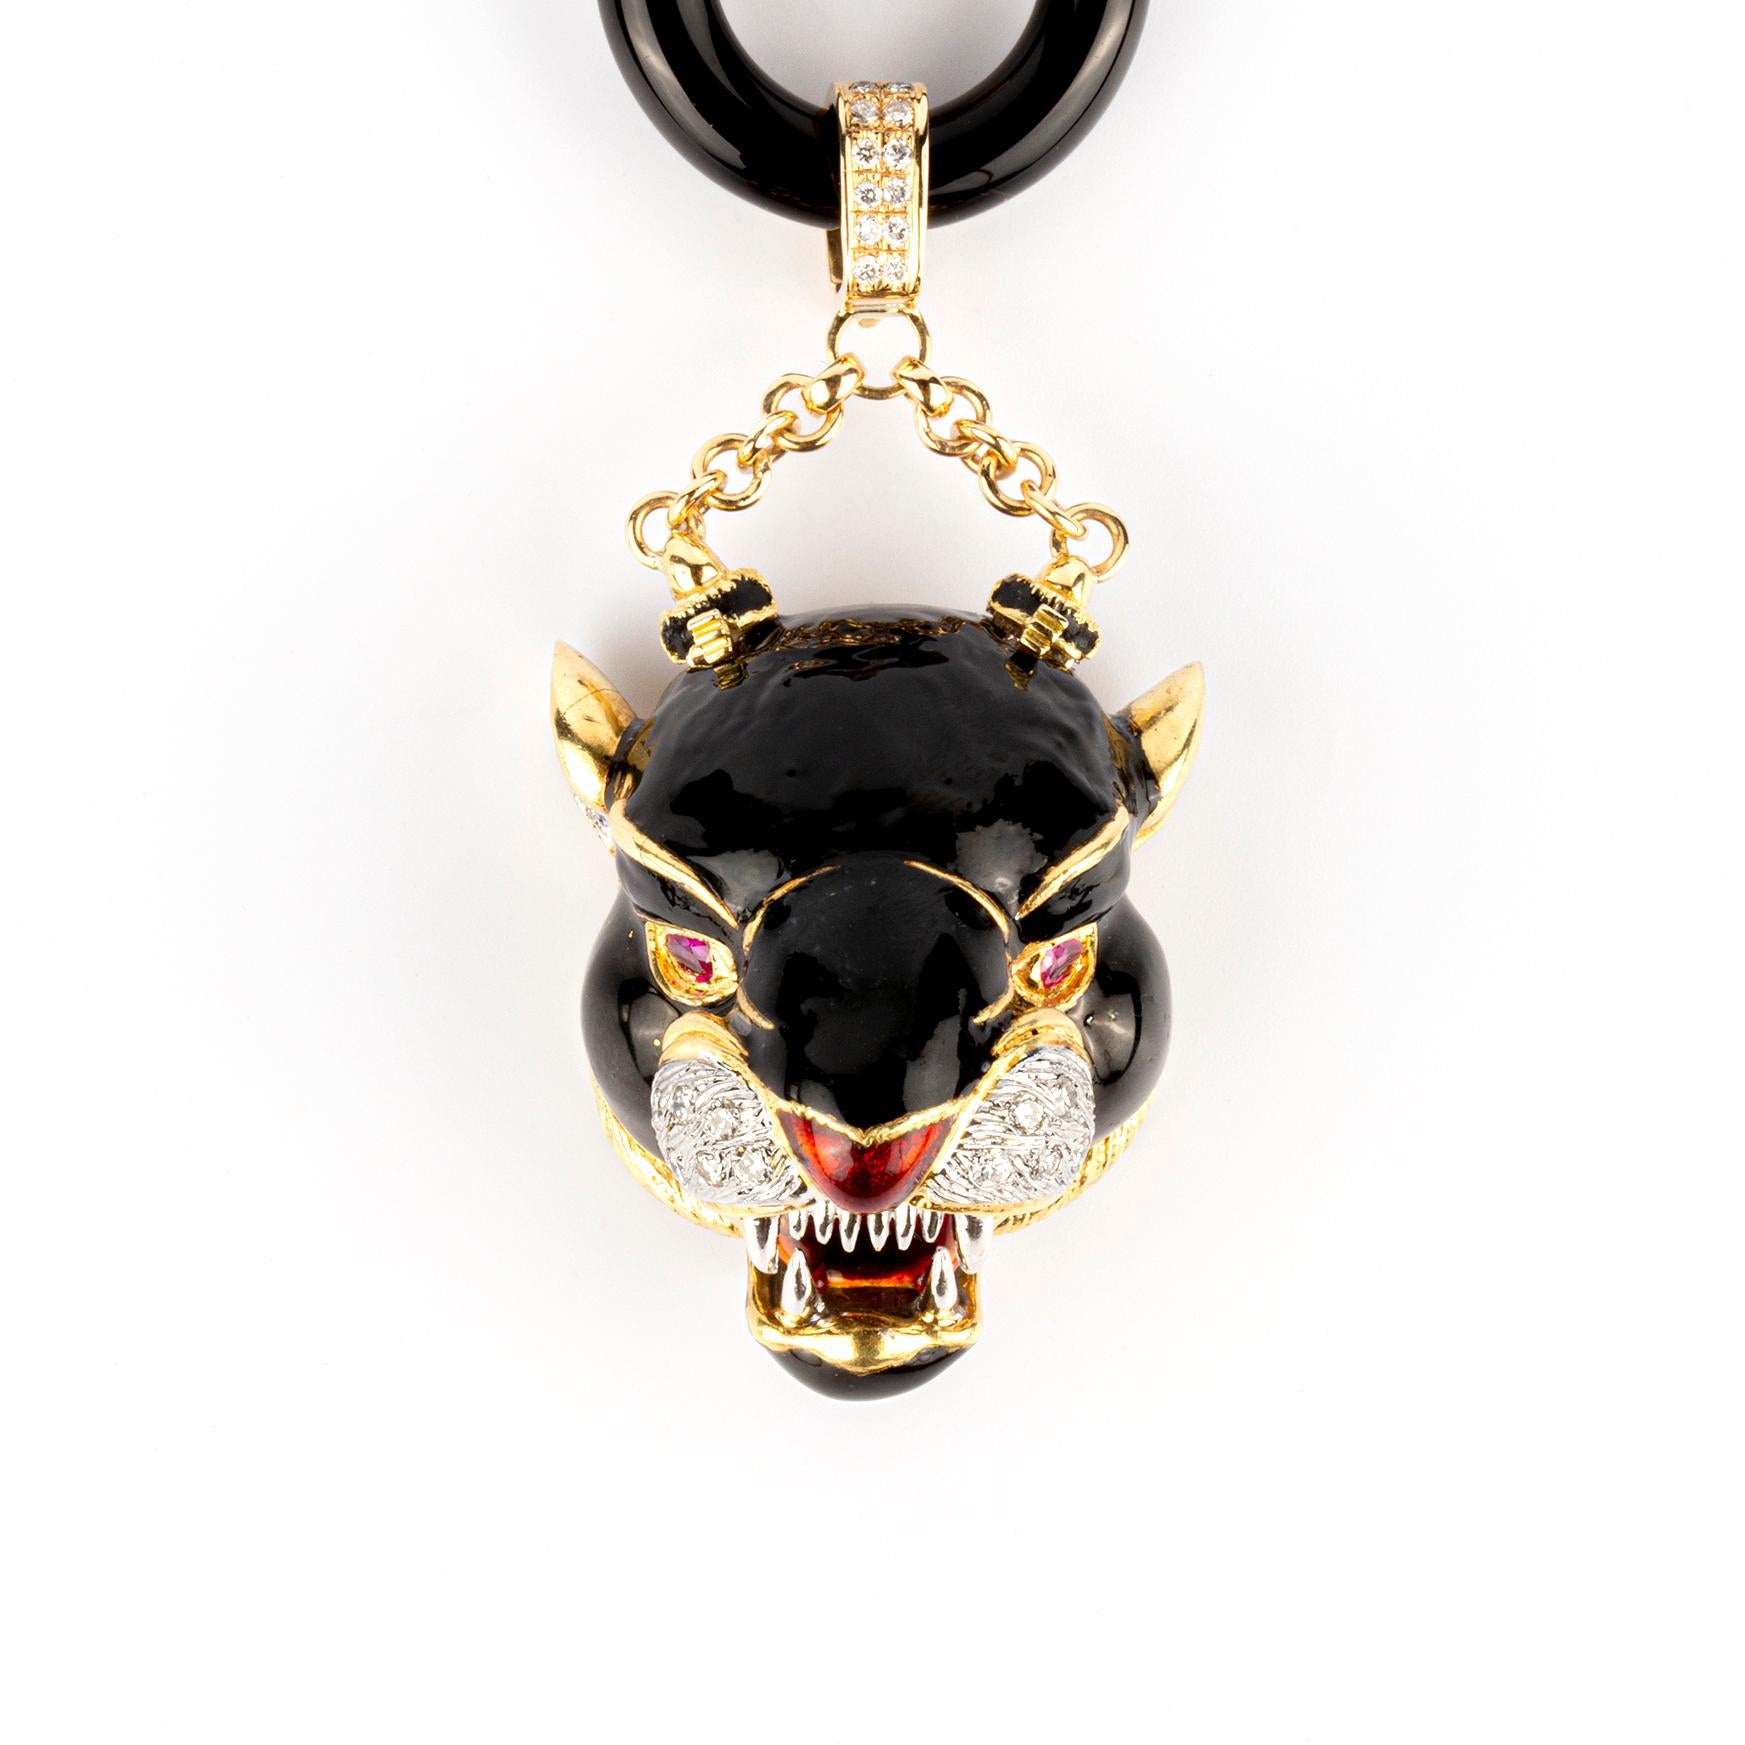 Frascarolo Jaguar Pendant and Brooch in black enamel on 18k gold, with lapis lazuli and diamond details, further embellished by ruby eyes with a red enamel nose and mouth with white gold fangs.  Made in Italy, circa 1960.